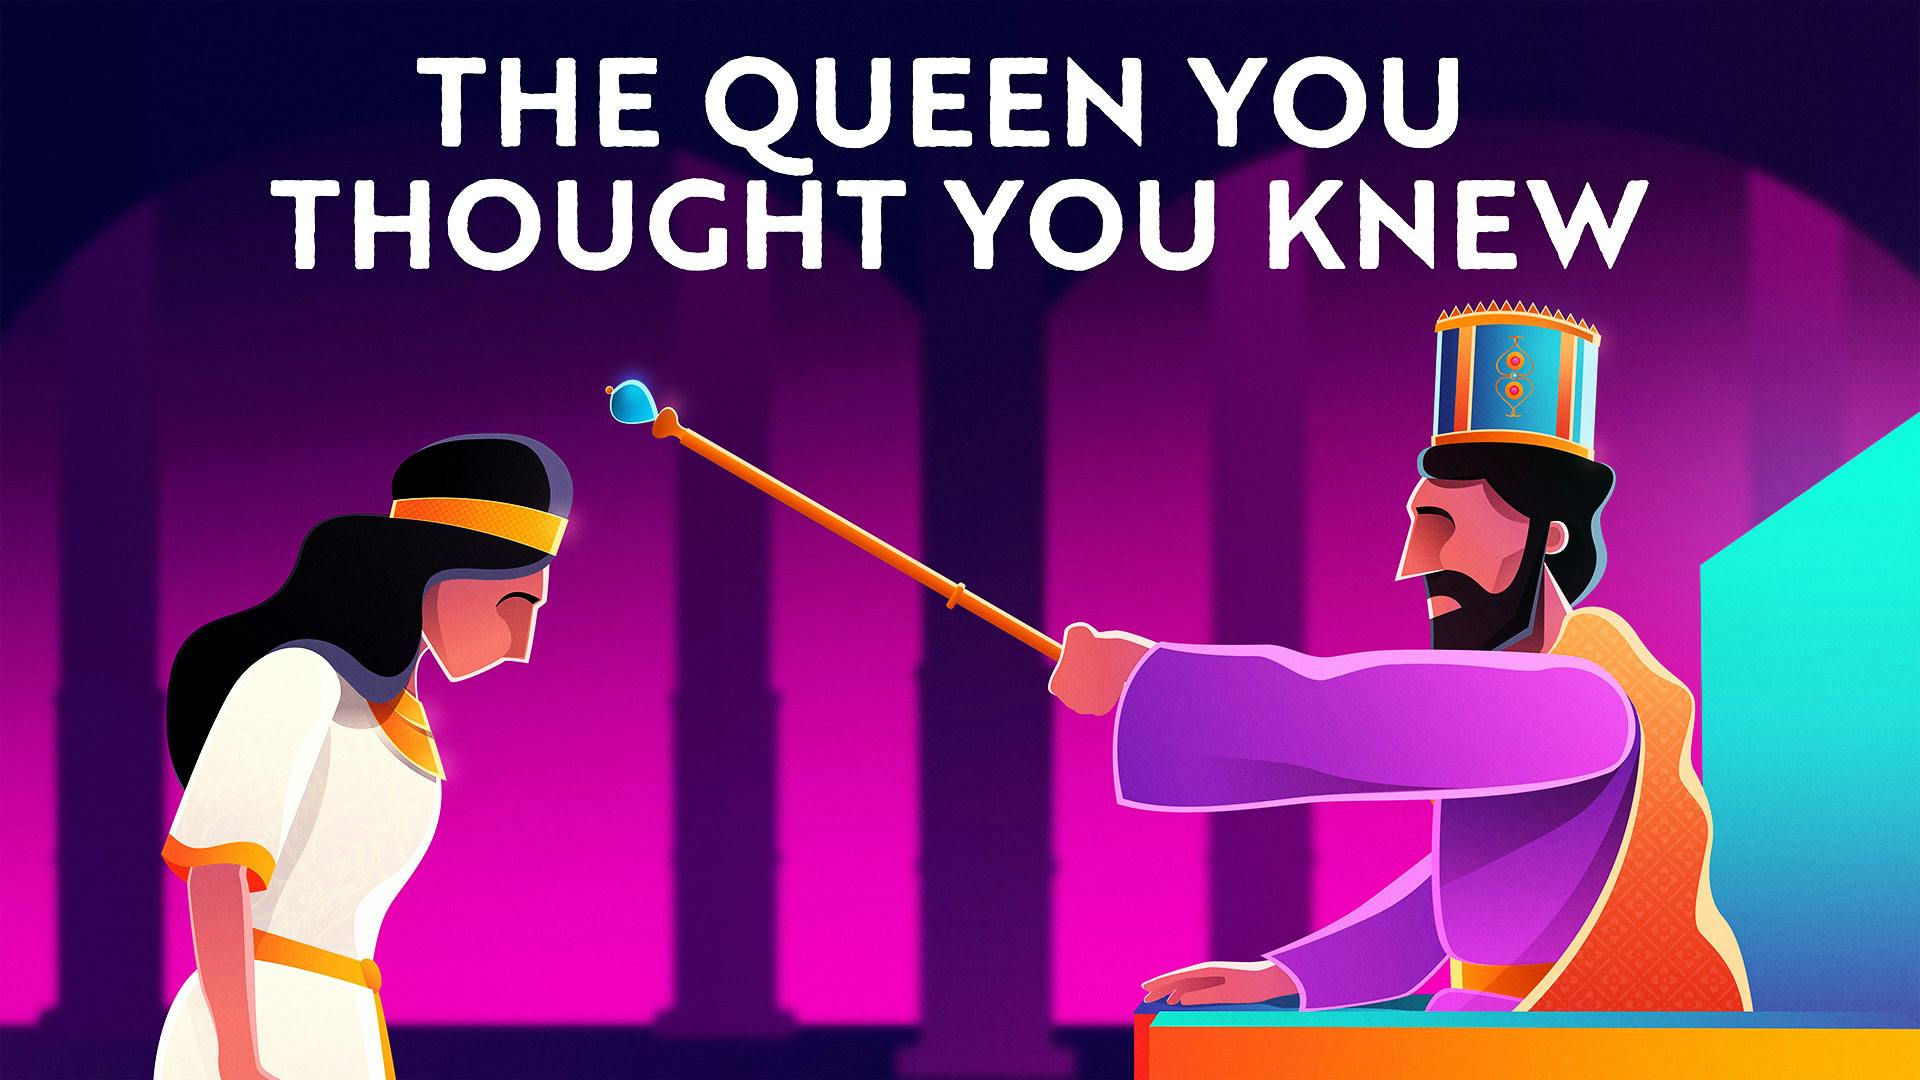 Esther: The Queen You Thought You Knew